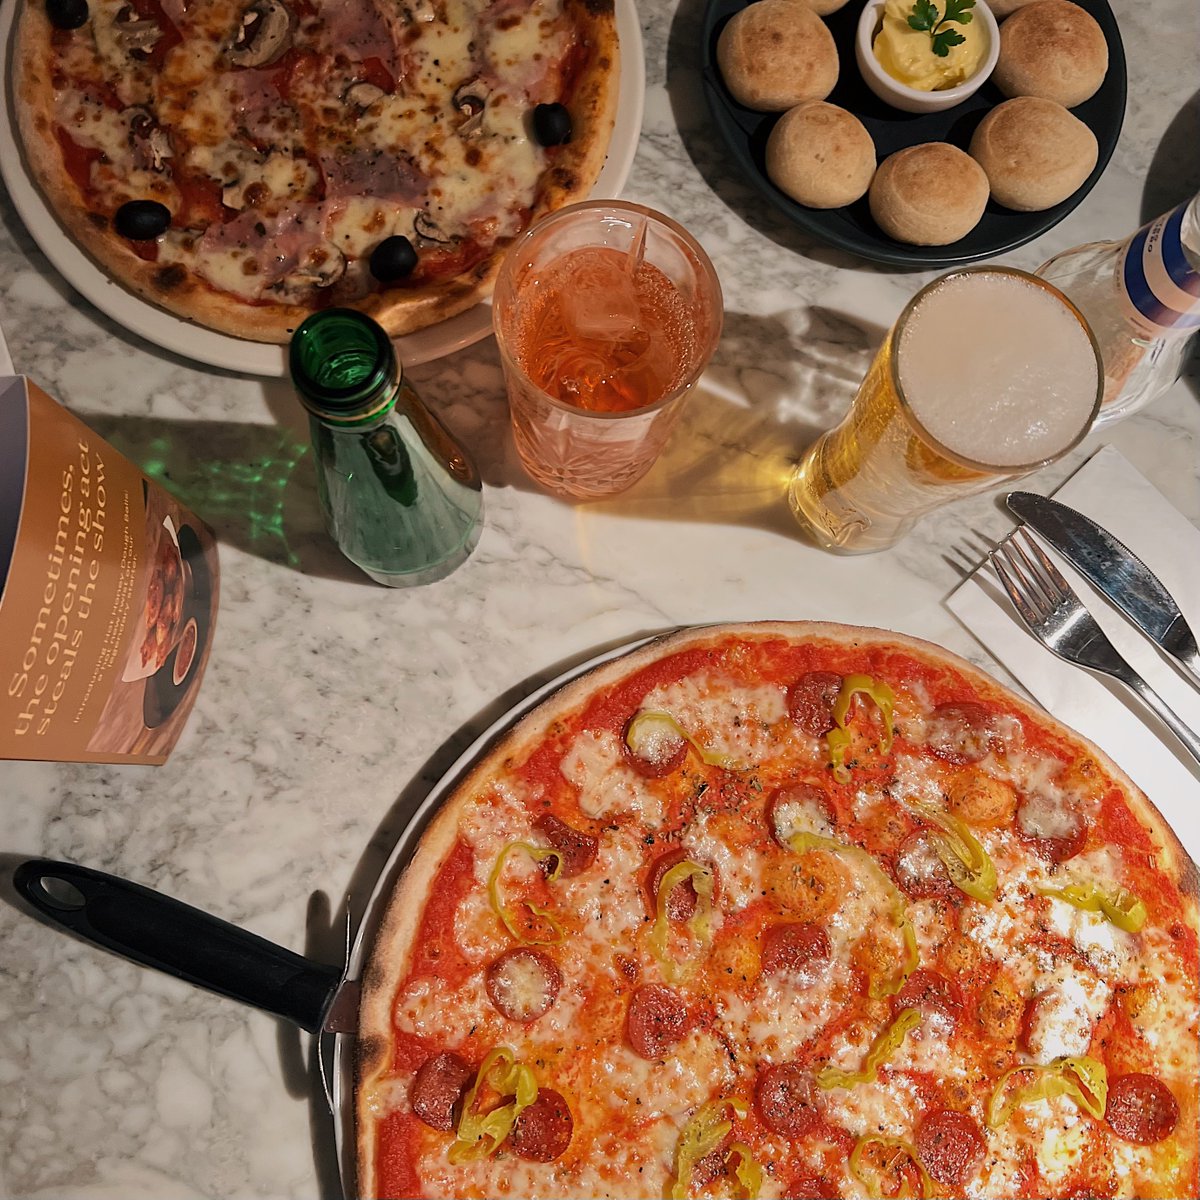 COMPETITION TIME 🏆 It's time to treat one of you! Fancy winning £100 PizzaExpress voucher? Enter by👇 🍕Make sure you're following us 🍕Tag a mate 🍕Retweet Comp ends 03/05. Winner will be contacted by us only via DM on 04/05. T&Cs apply - link in bio 🔗 #TagAMate